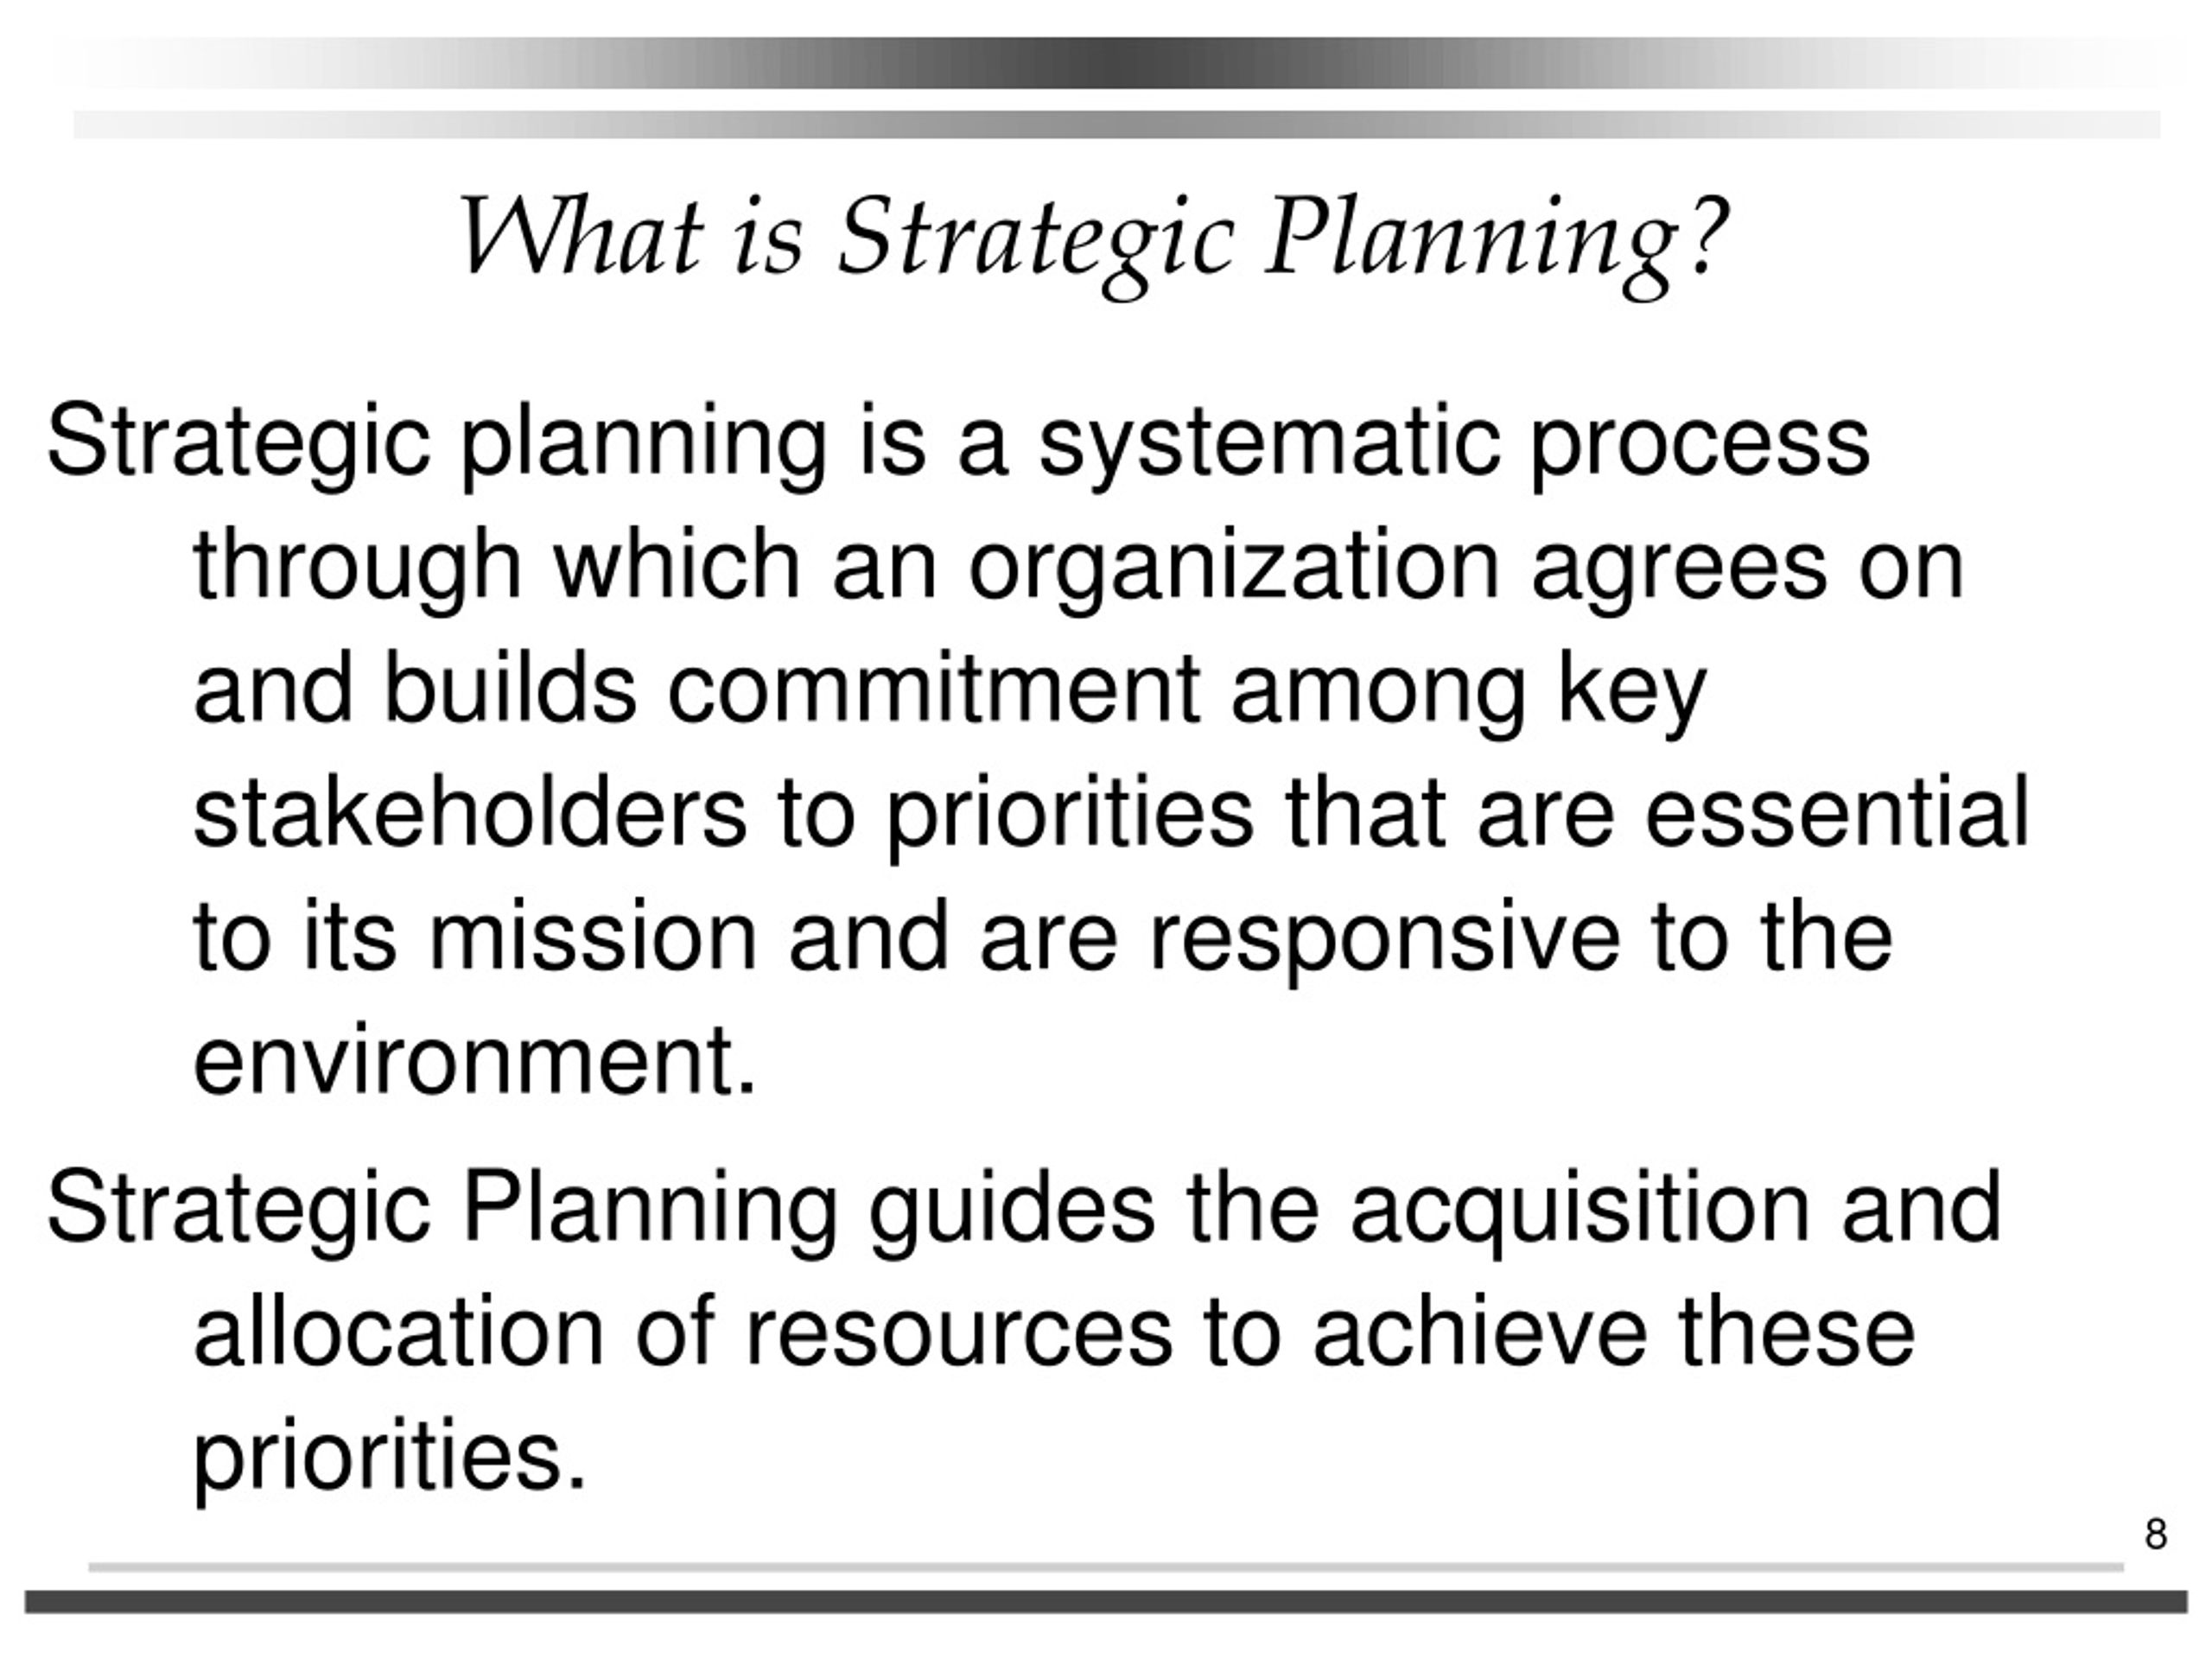 Ppt Strategies Policies And Planning Premises Powerpoint Presentation Id9095976 0381